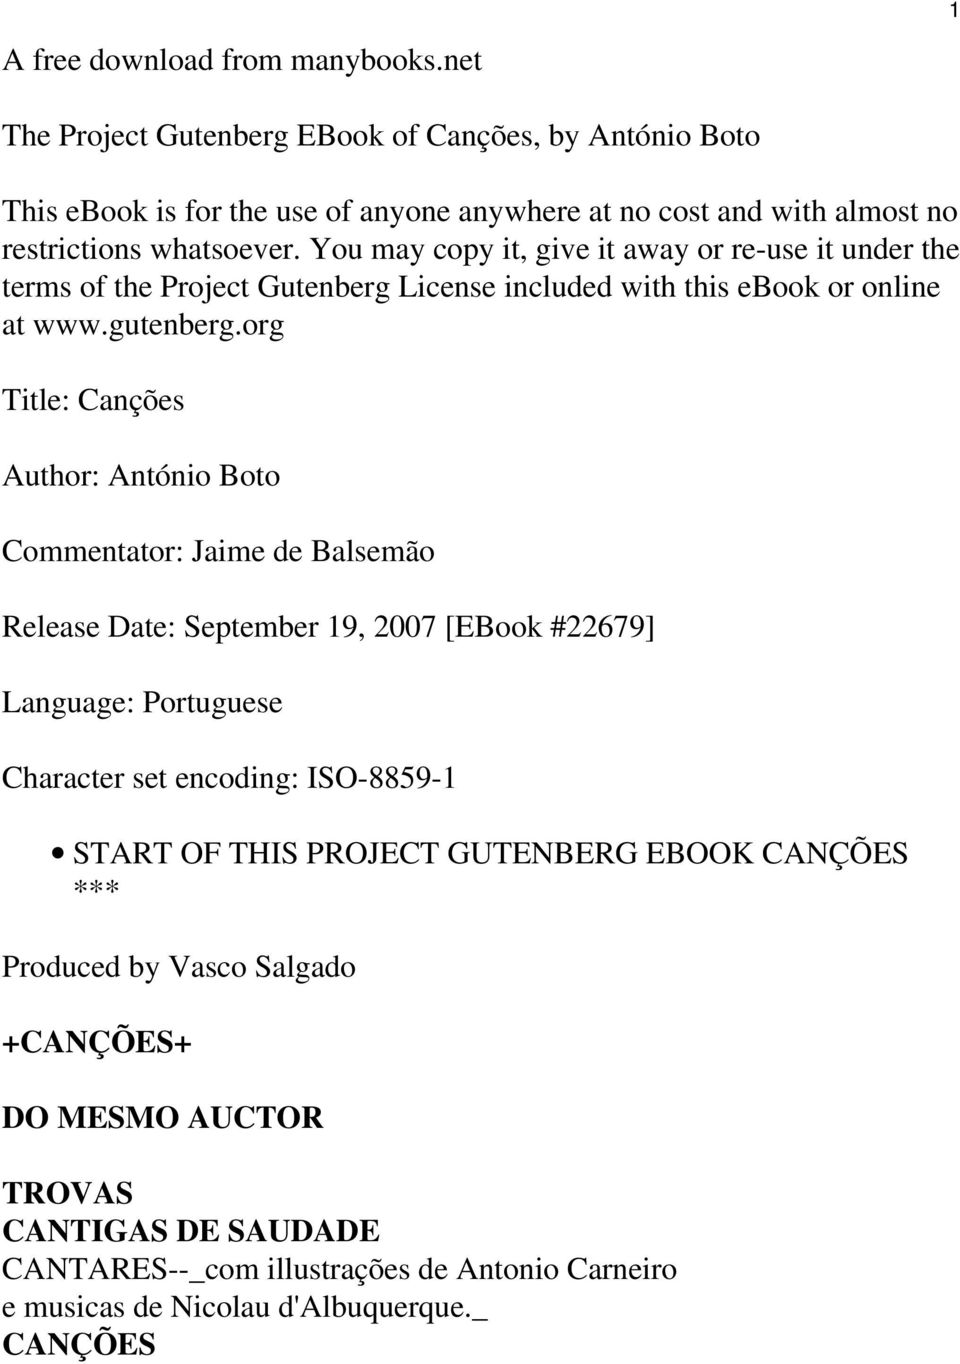 You may copy it, give it away or re-use it under the terms of the Project Gutenberg License included with this ebook or online at www.gutenberg.